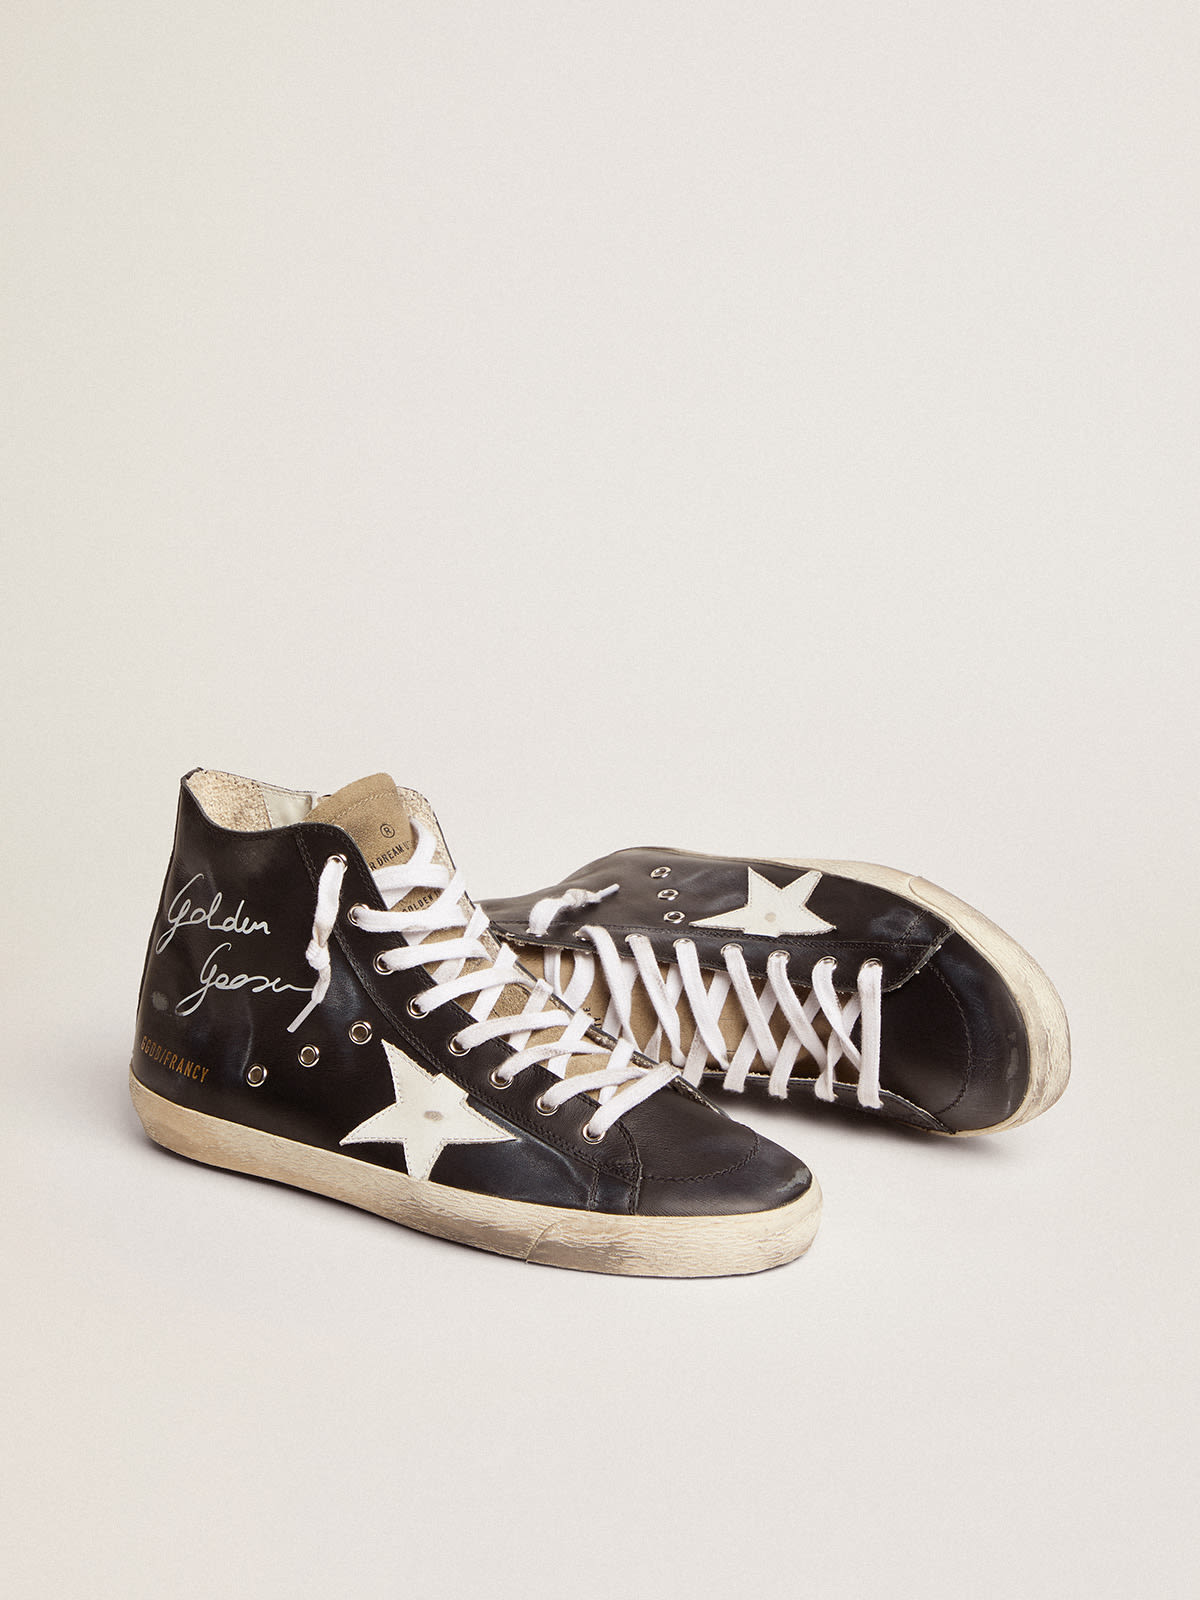 Golden Goose - Women's Francy with black leather upper and white star in 